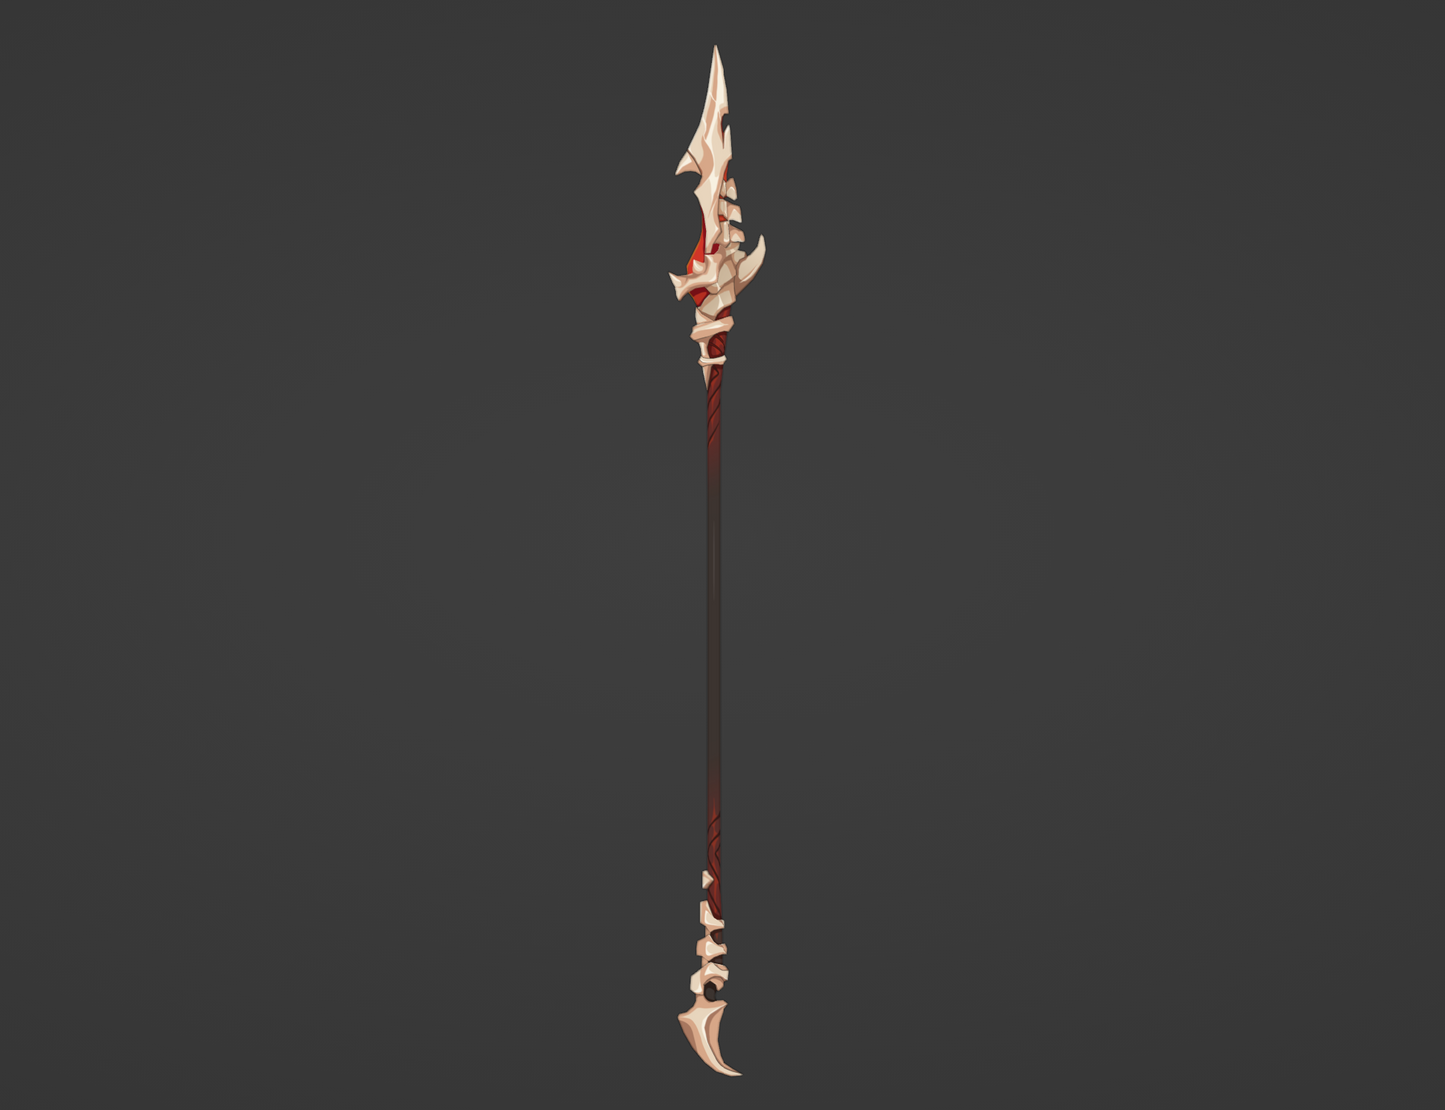 Dragonspine Spear - Digital 3D Model Files and Physical 3D Printed Kit Options - Xiangling Cosplay